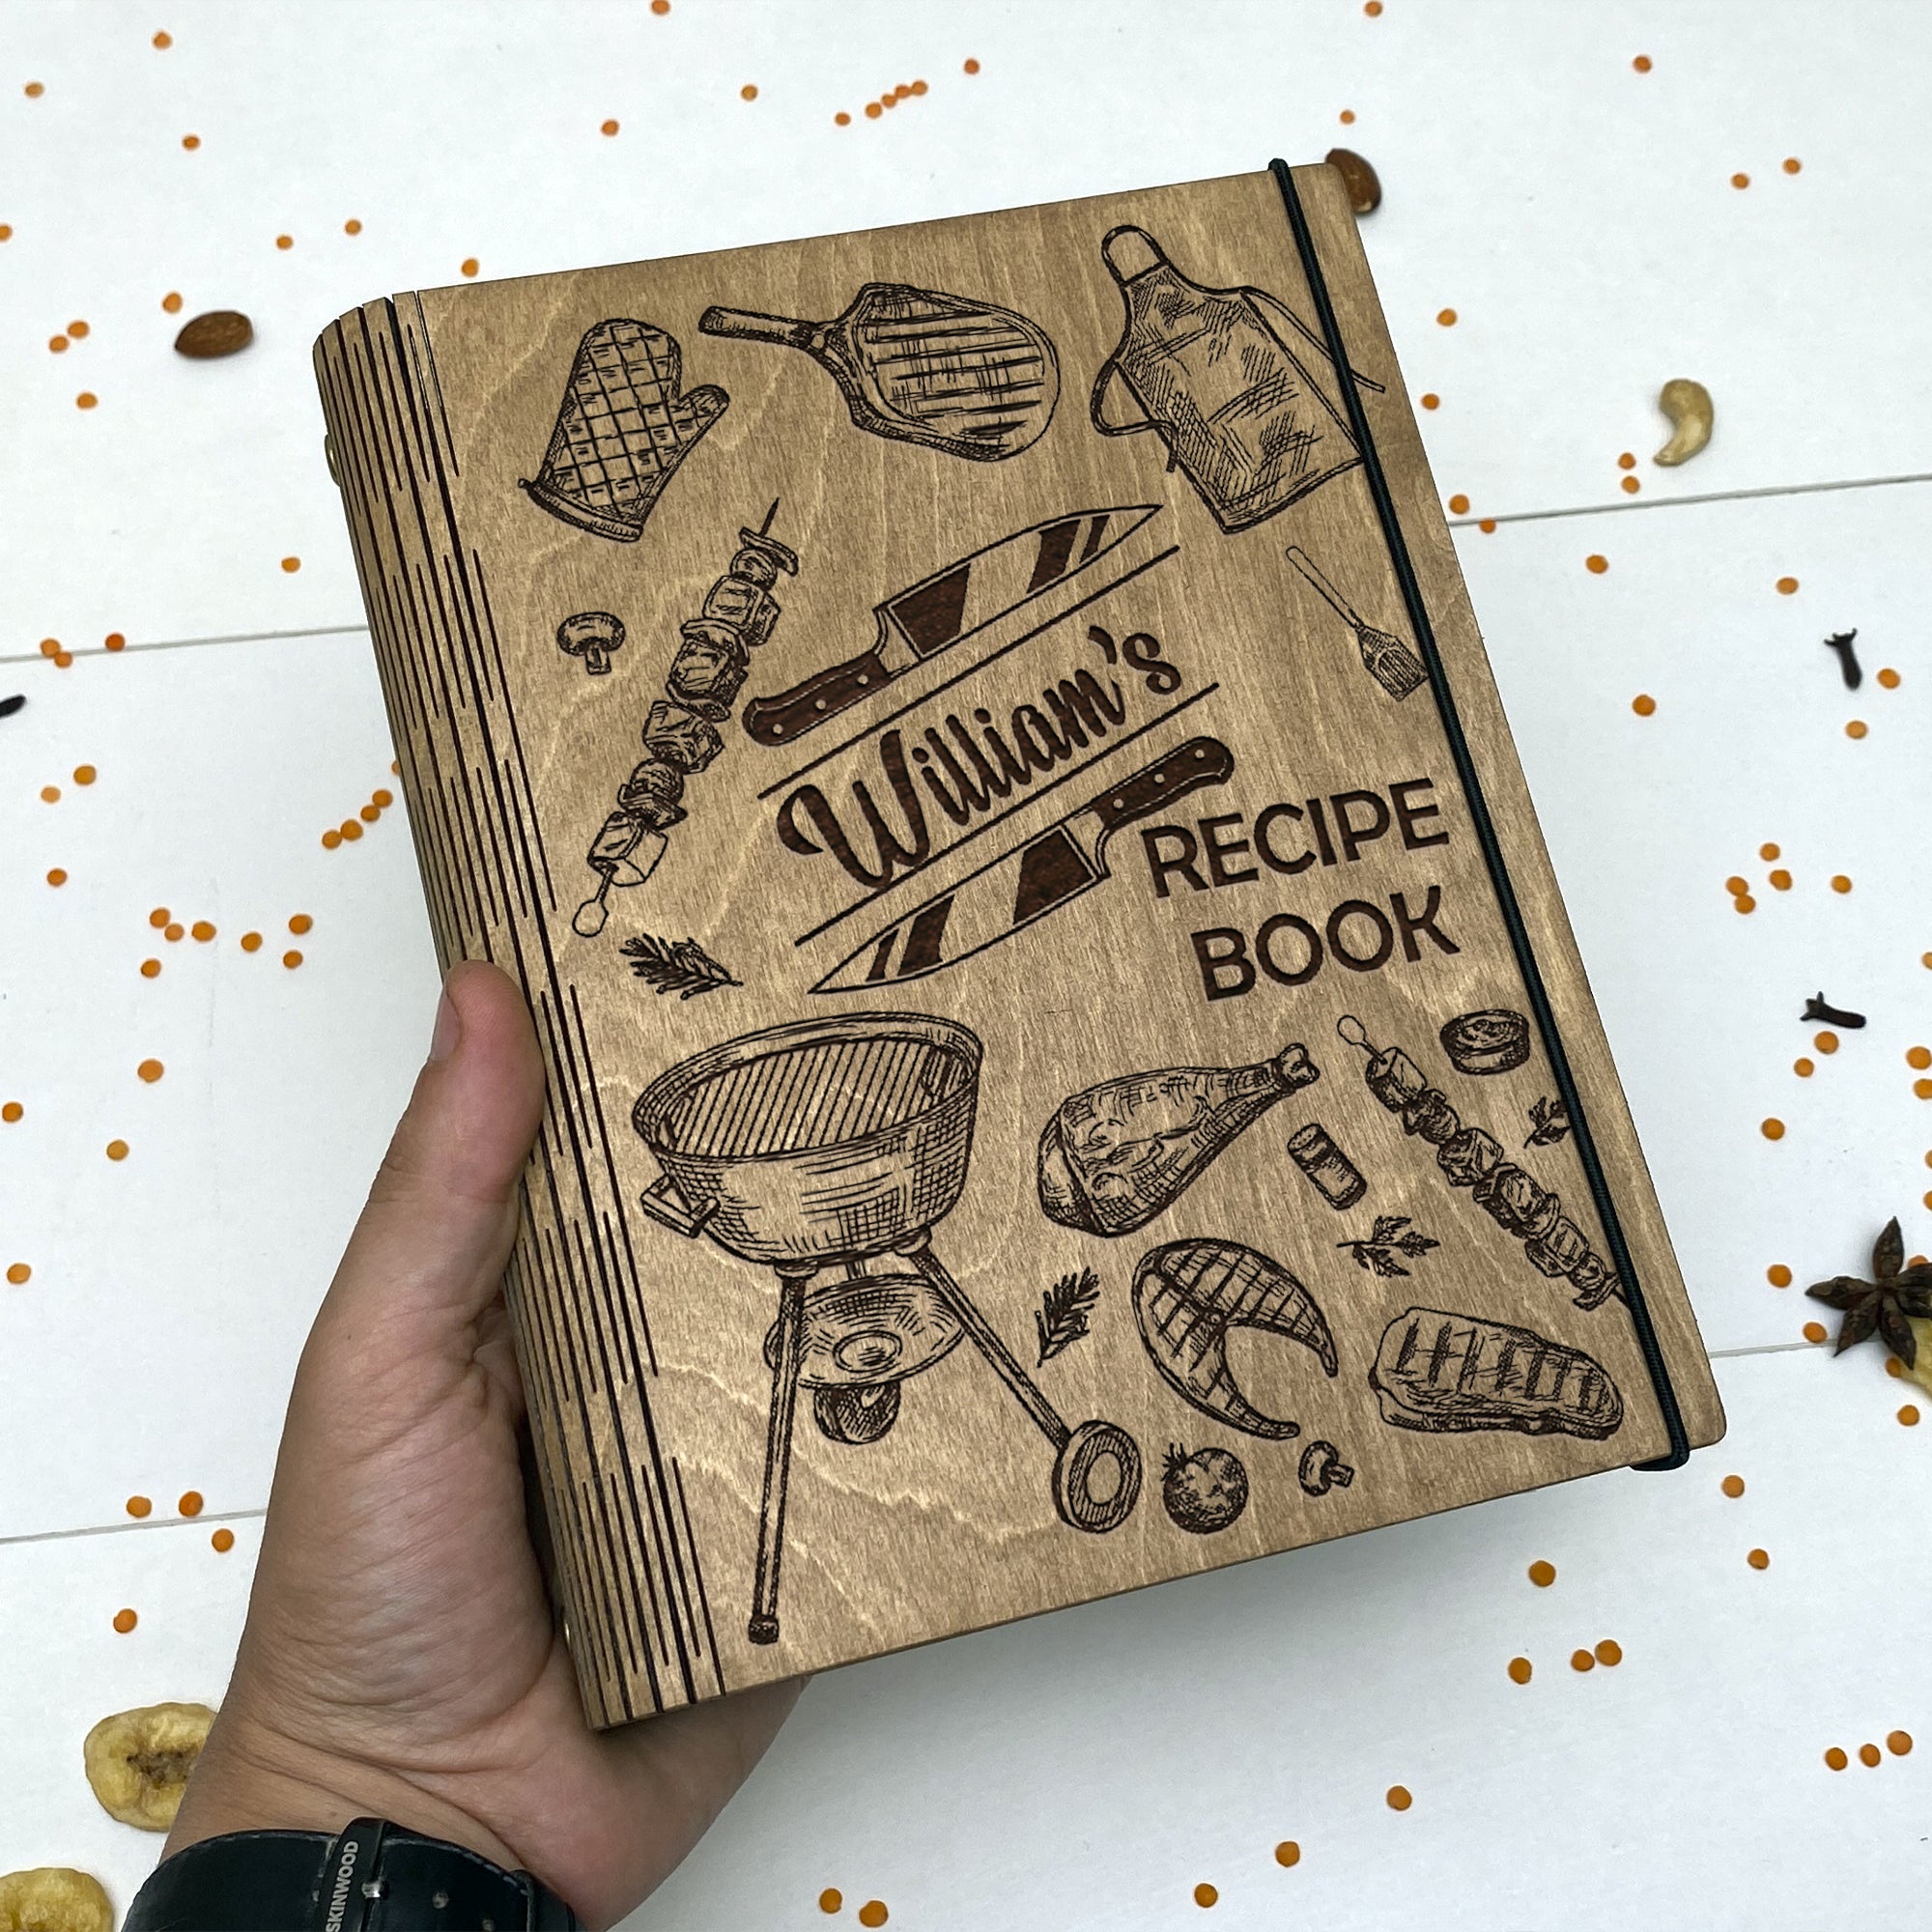 Barbecue Book Free custom engraving